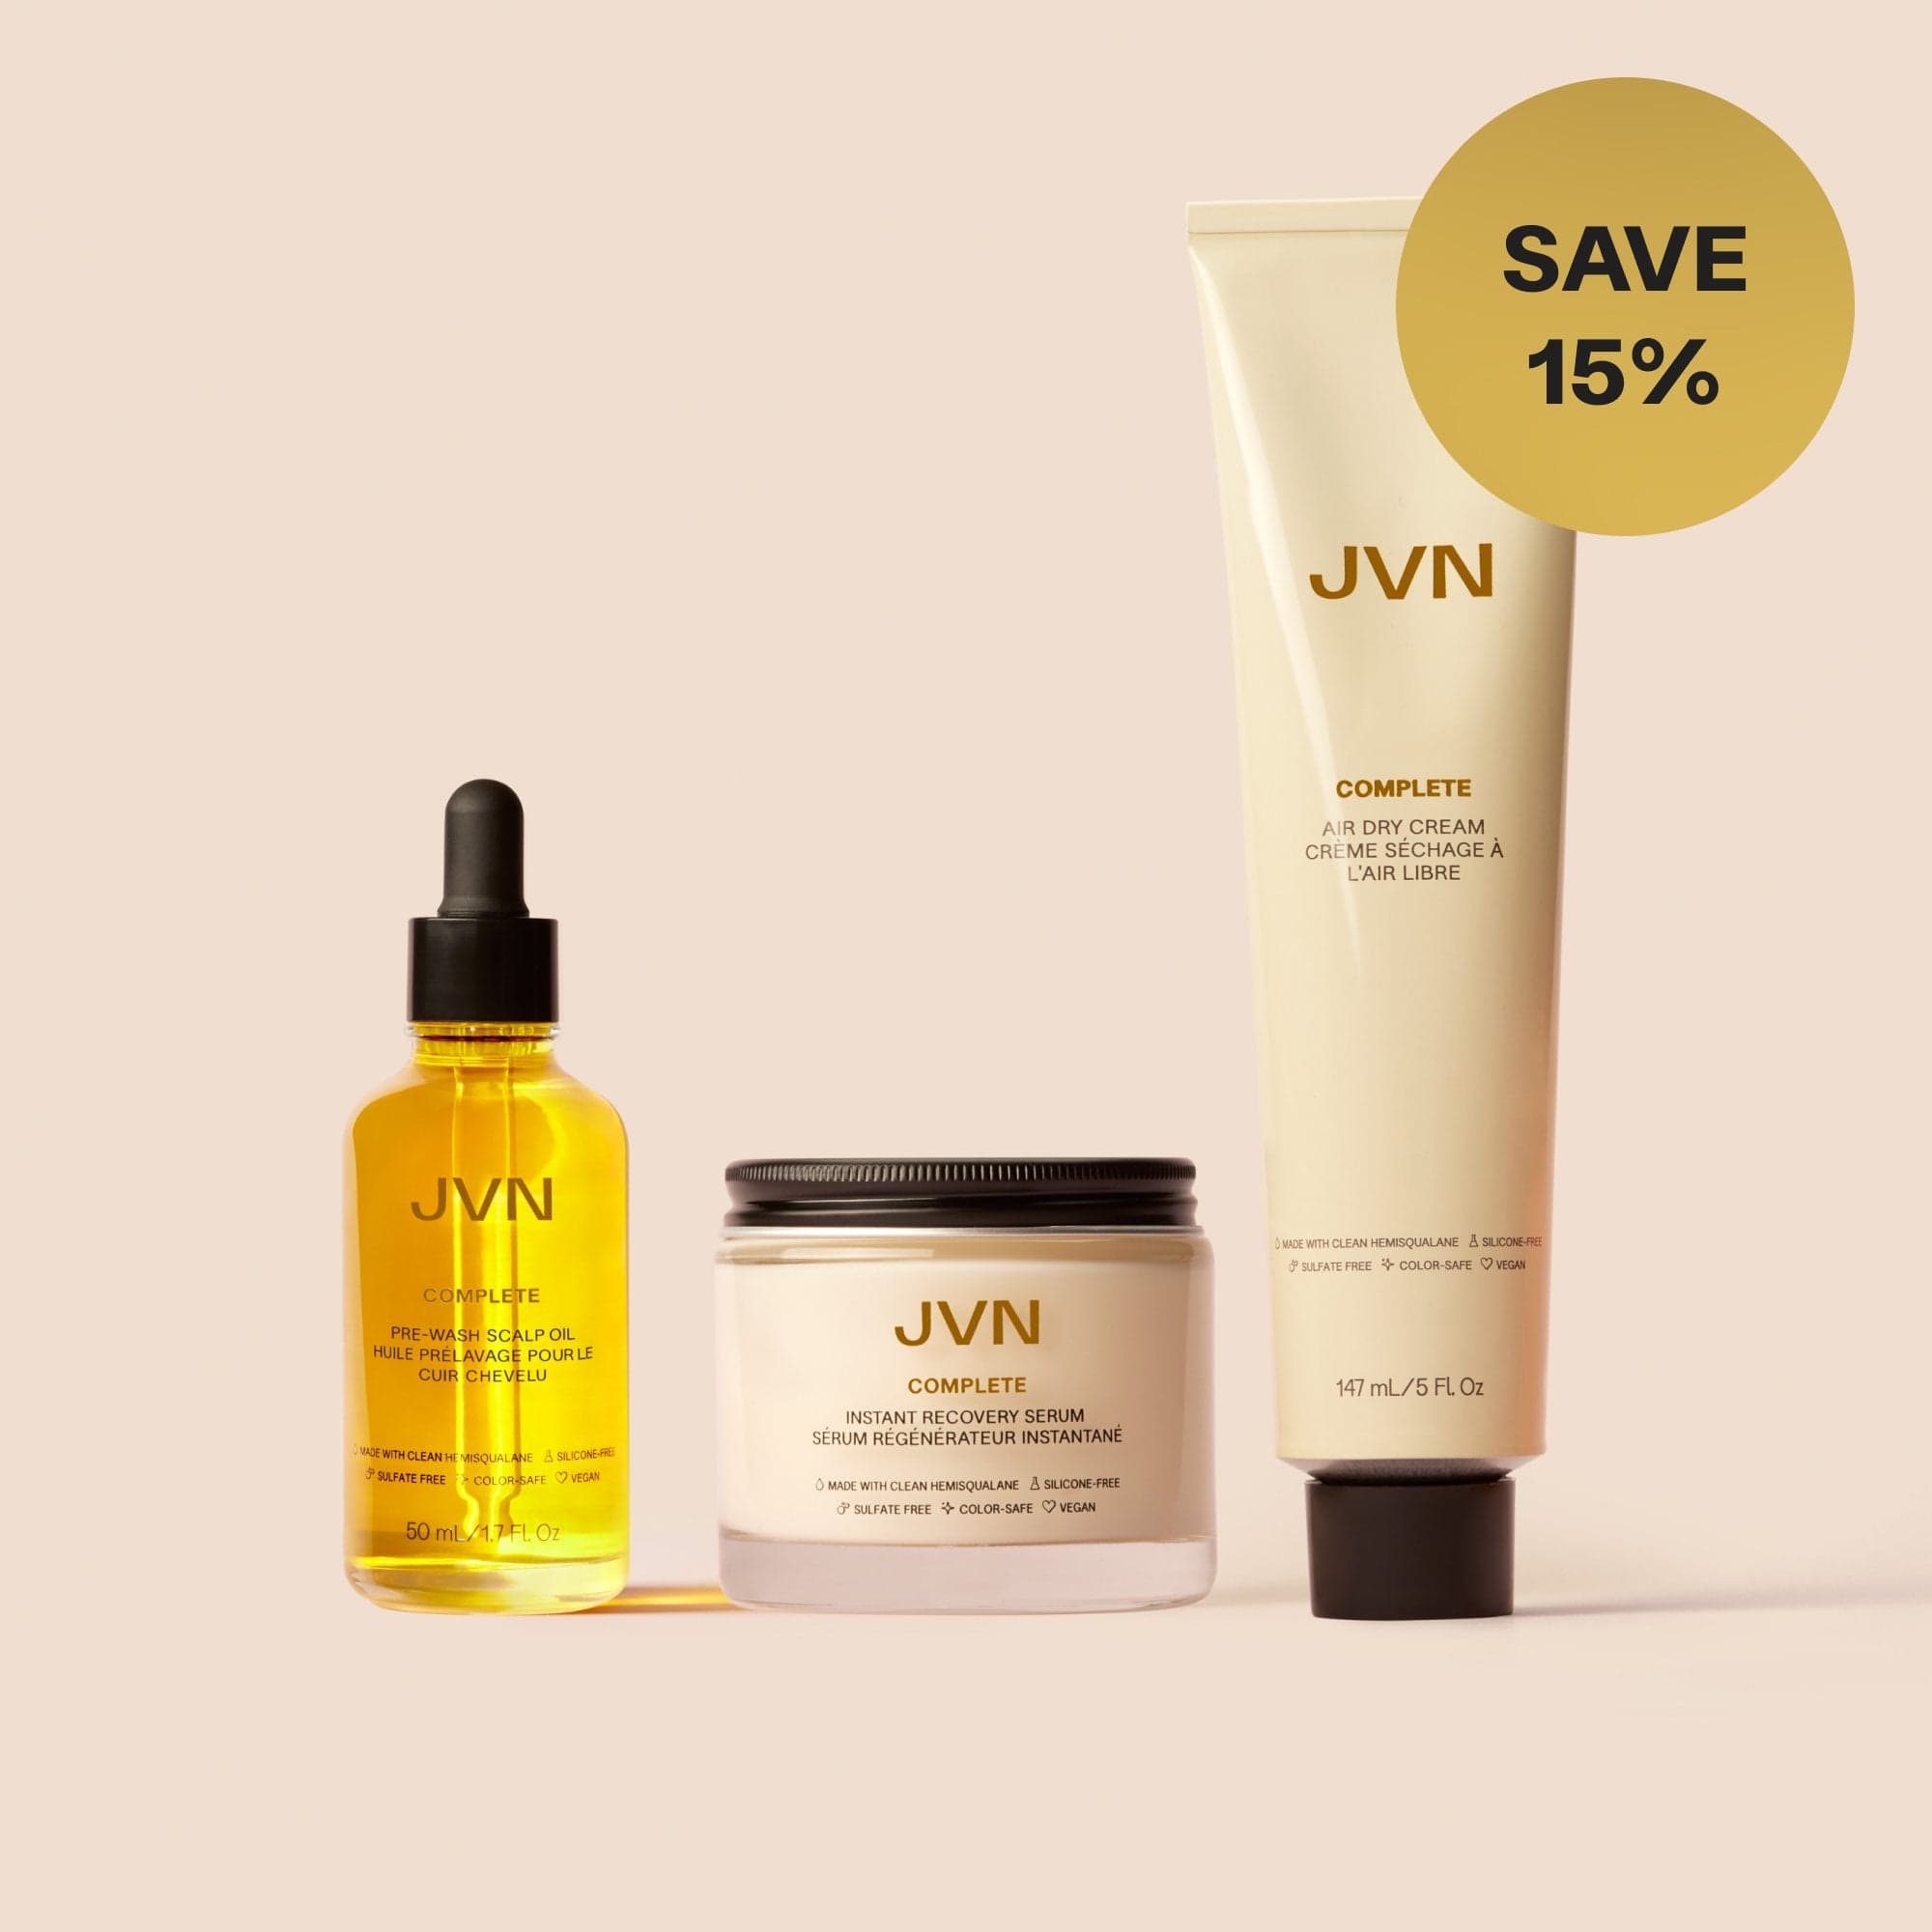 JVN Hair Only The Bestsellers For Mom Set sulfate-free silicone-free sustainable